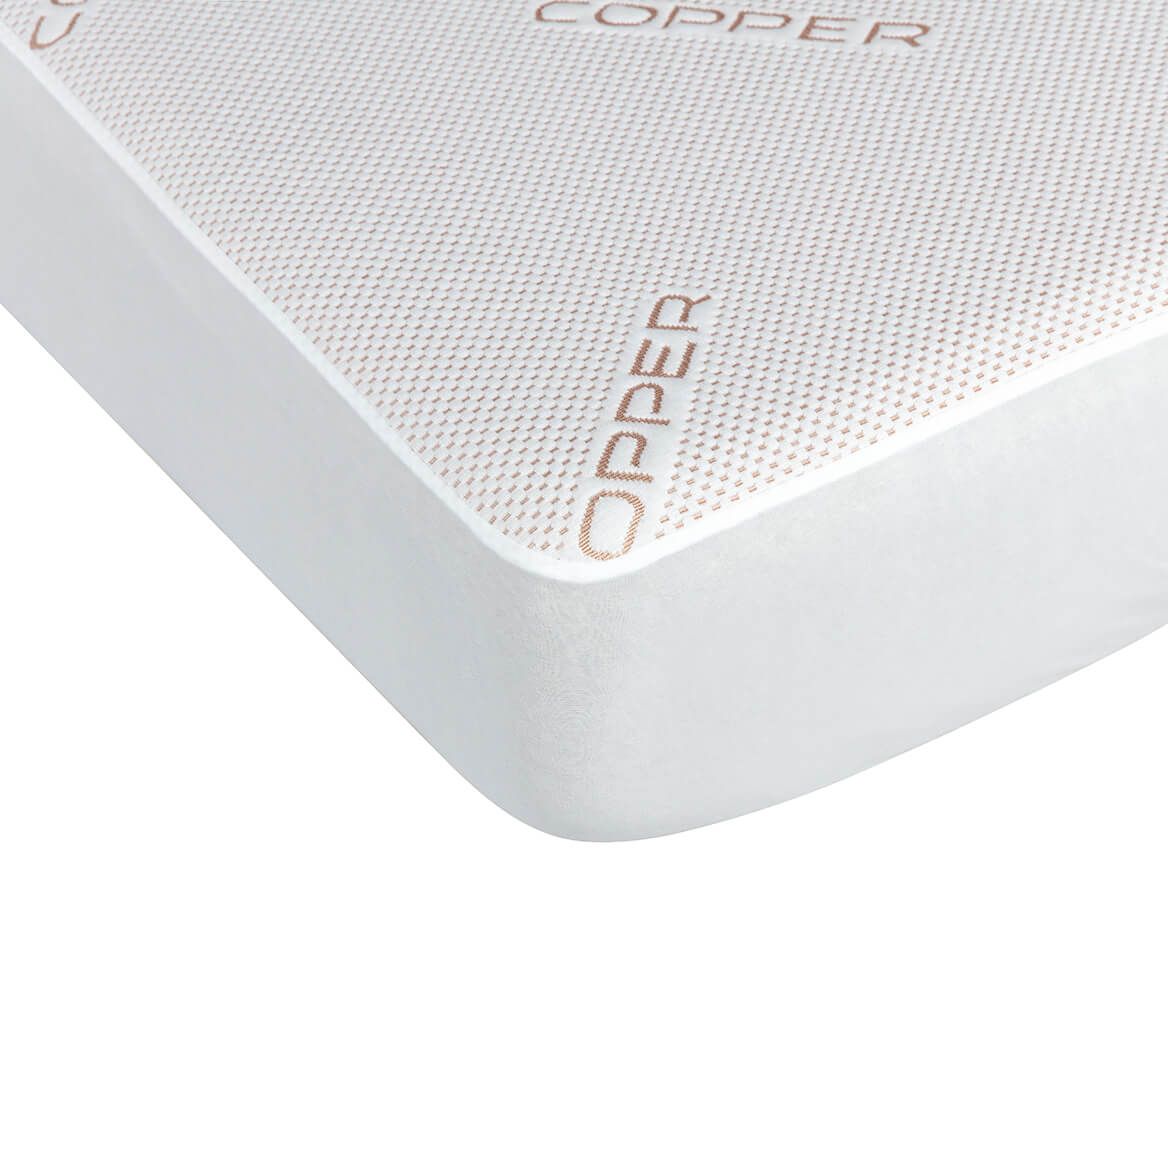 Copper Infused Mattress Cover by OakRidge™ + '-' + 374579